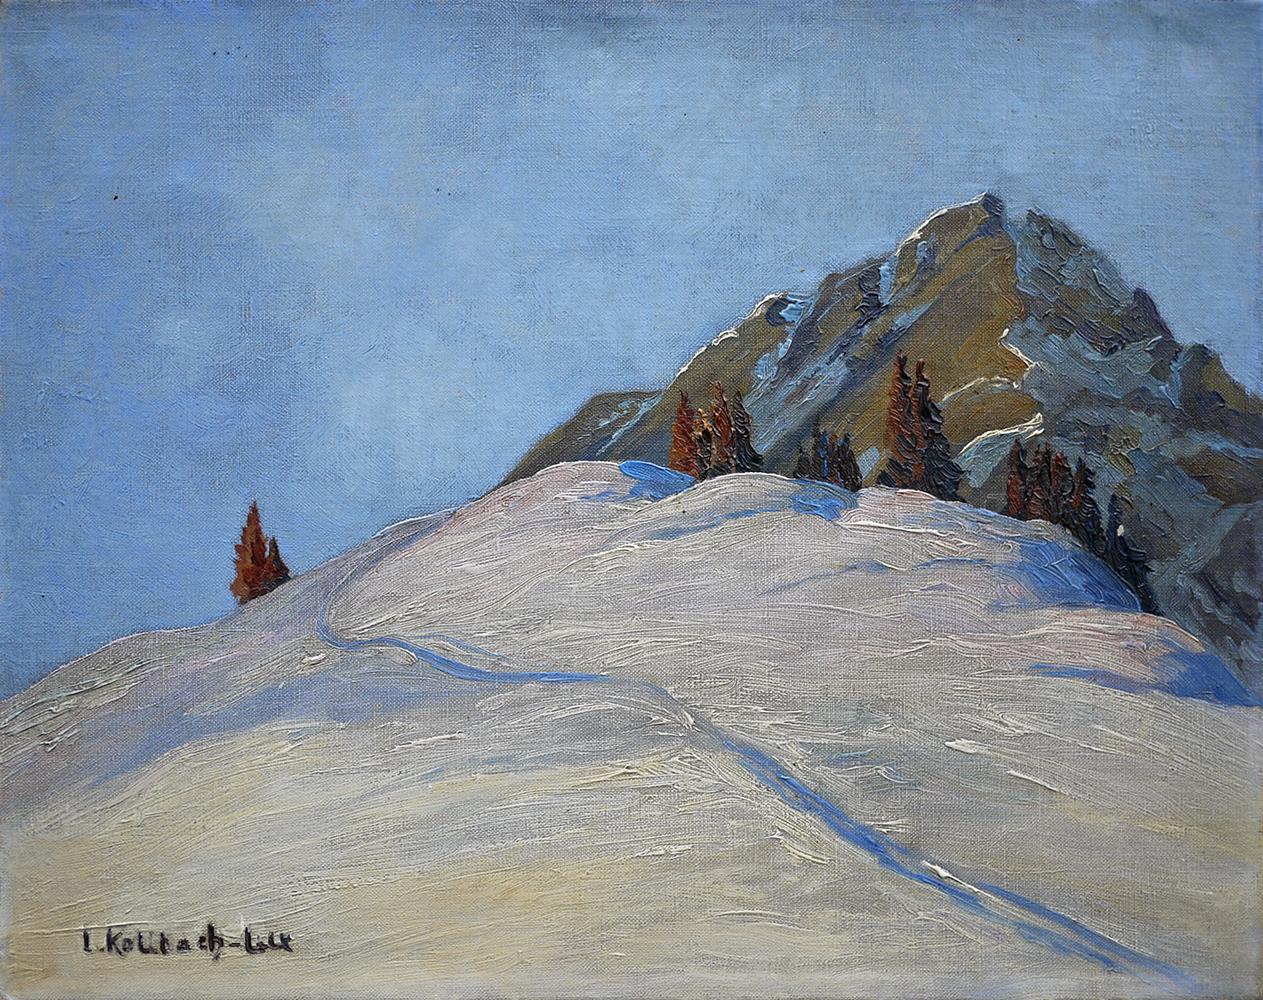 Winter landscape

Measures: 32 x 41 cm excluding frame, cm 47 x 55 frame included (the painting is sold with frame), oil on canvass,

1930s

Available with the antique fir frame.

About the author:
Kollbach-Lux, Lucia (1890 Bichlbach /